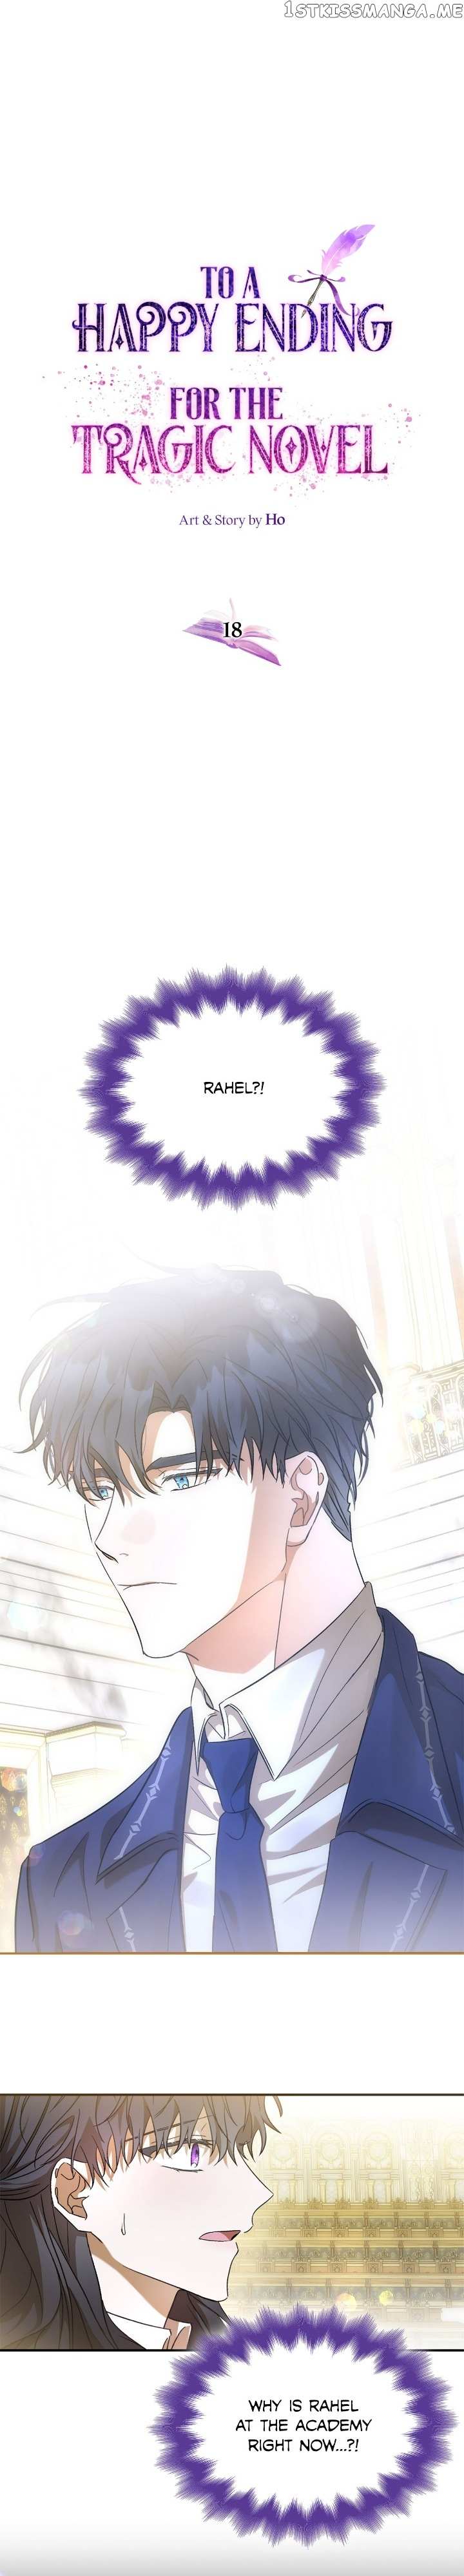 For The Happy Ending Of The Tragic Novel Chapter 18 - Picture 1